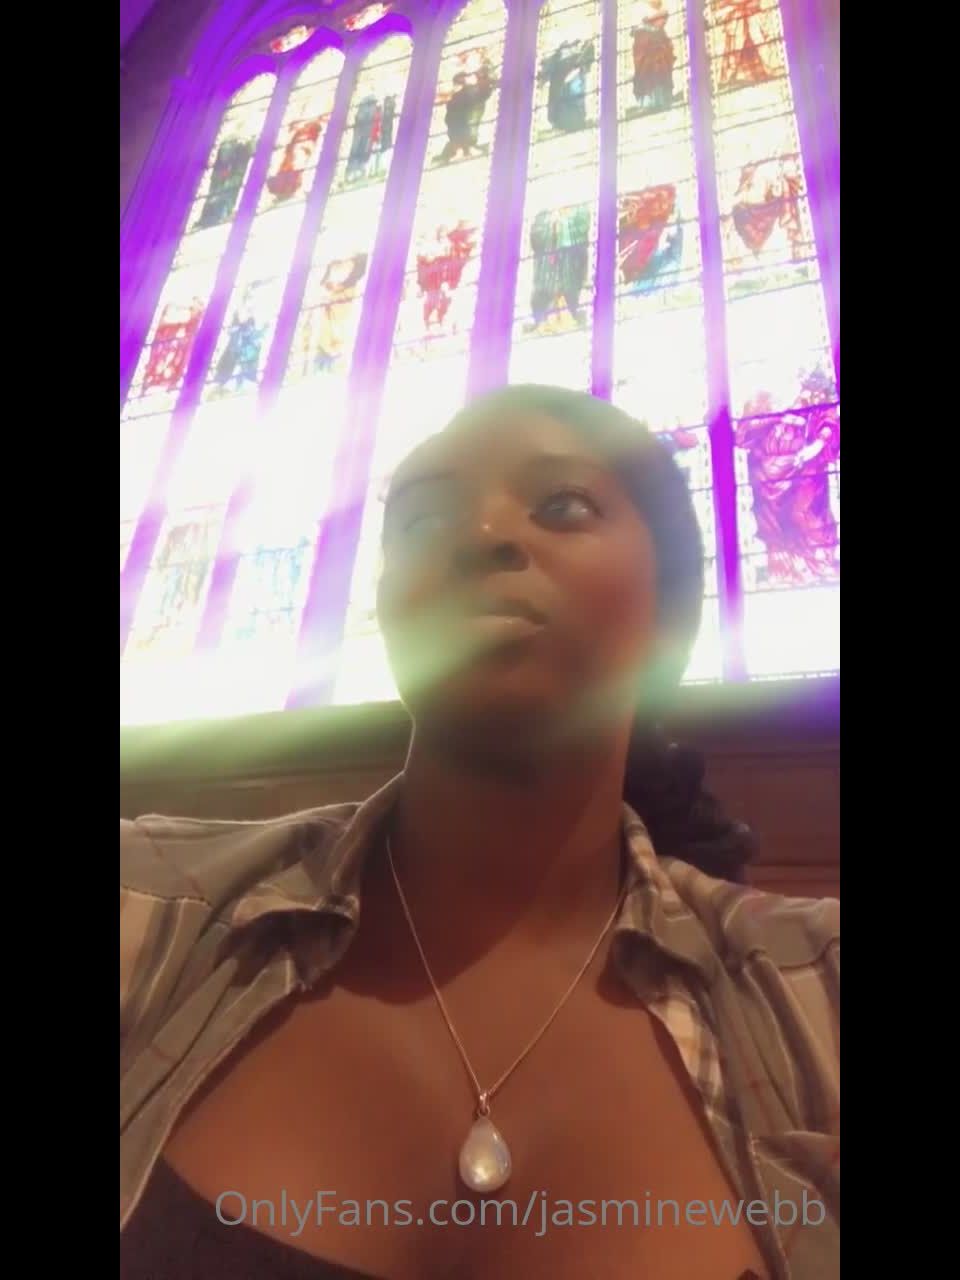 Onlyfans - Jasmine Webb - jasminewebbDont know about you but this is how I go to church lets catch that Holy Spirit we - 03-08-2021